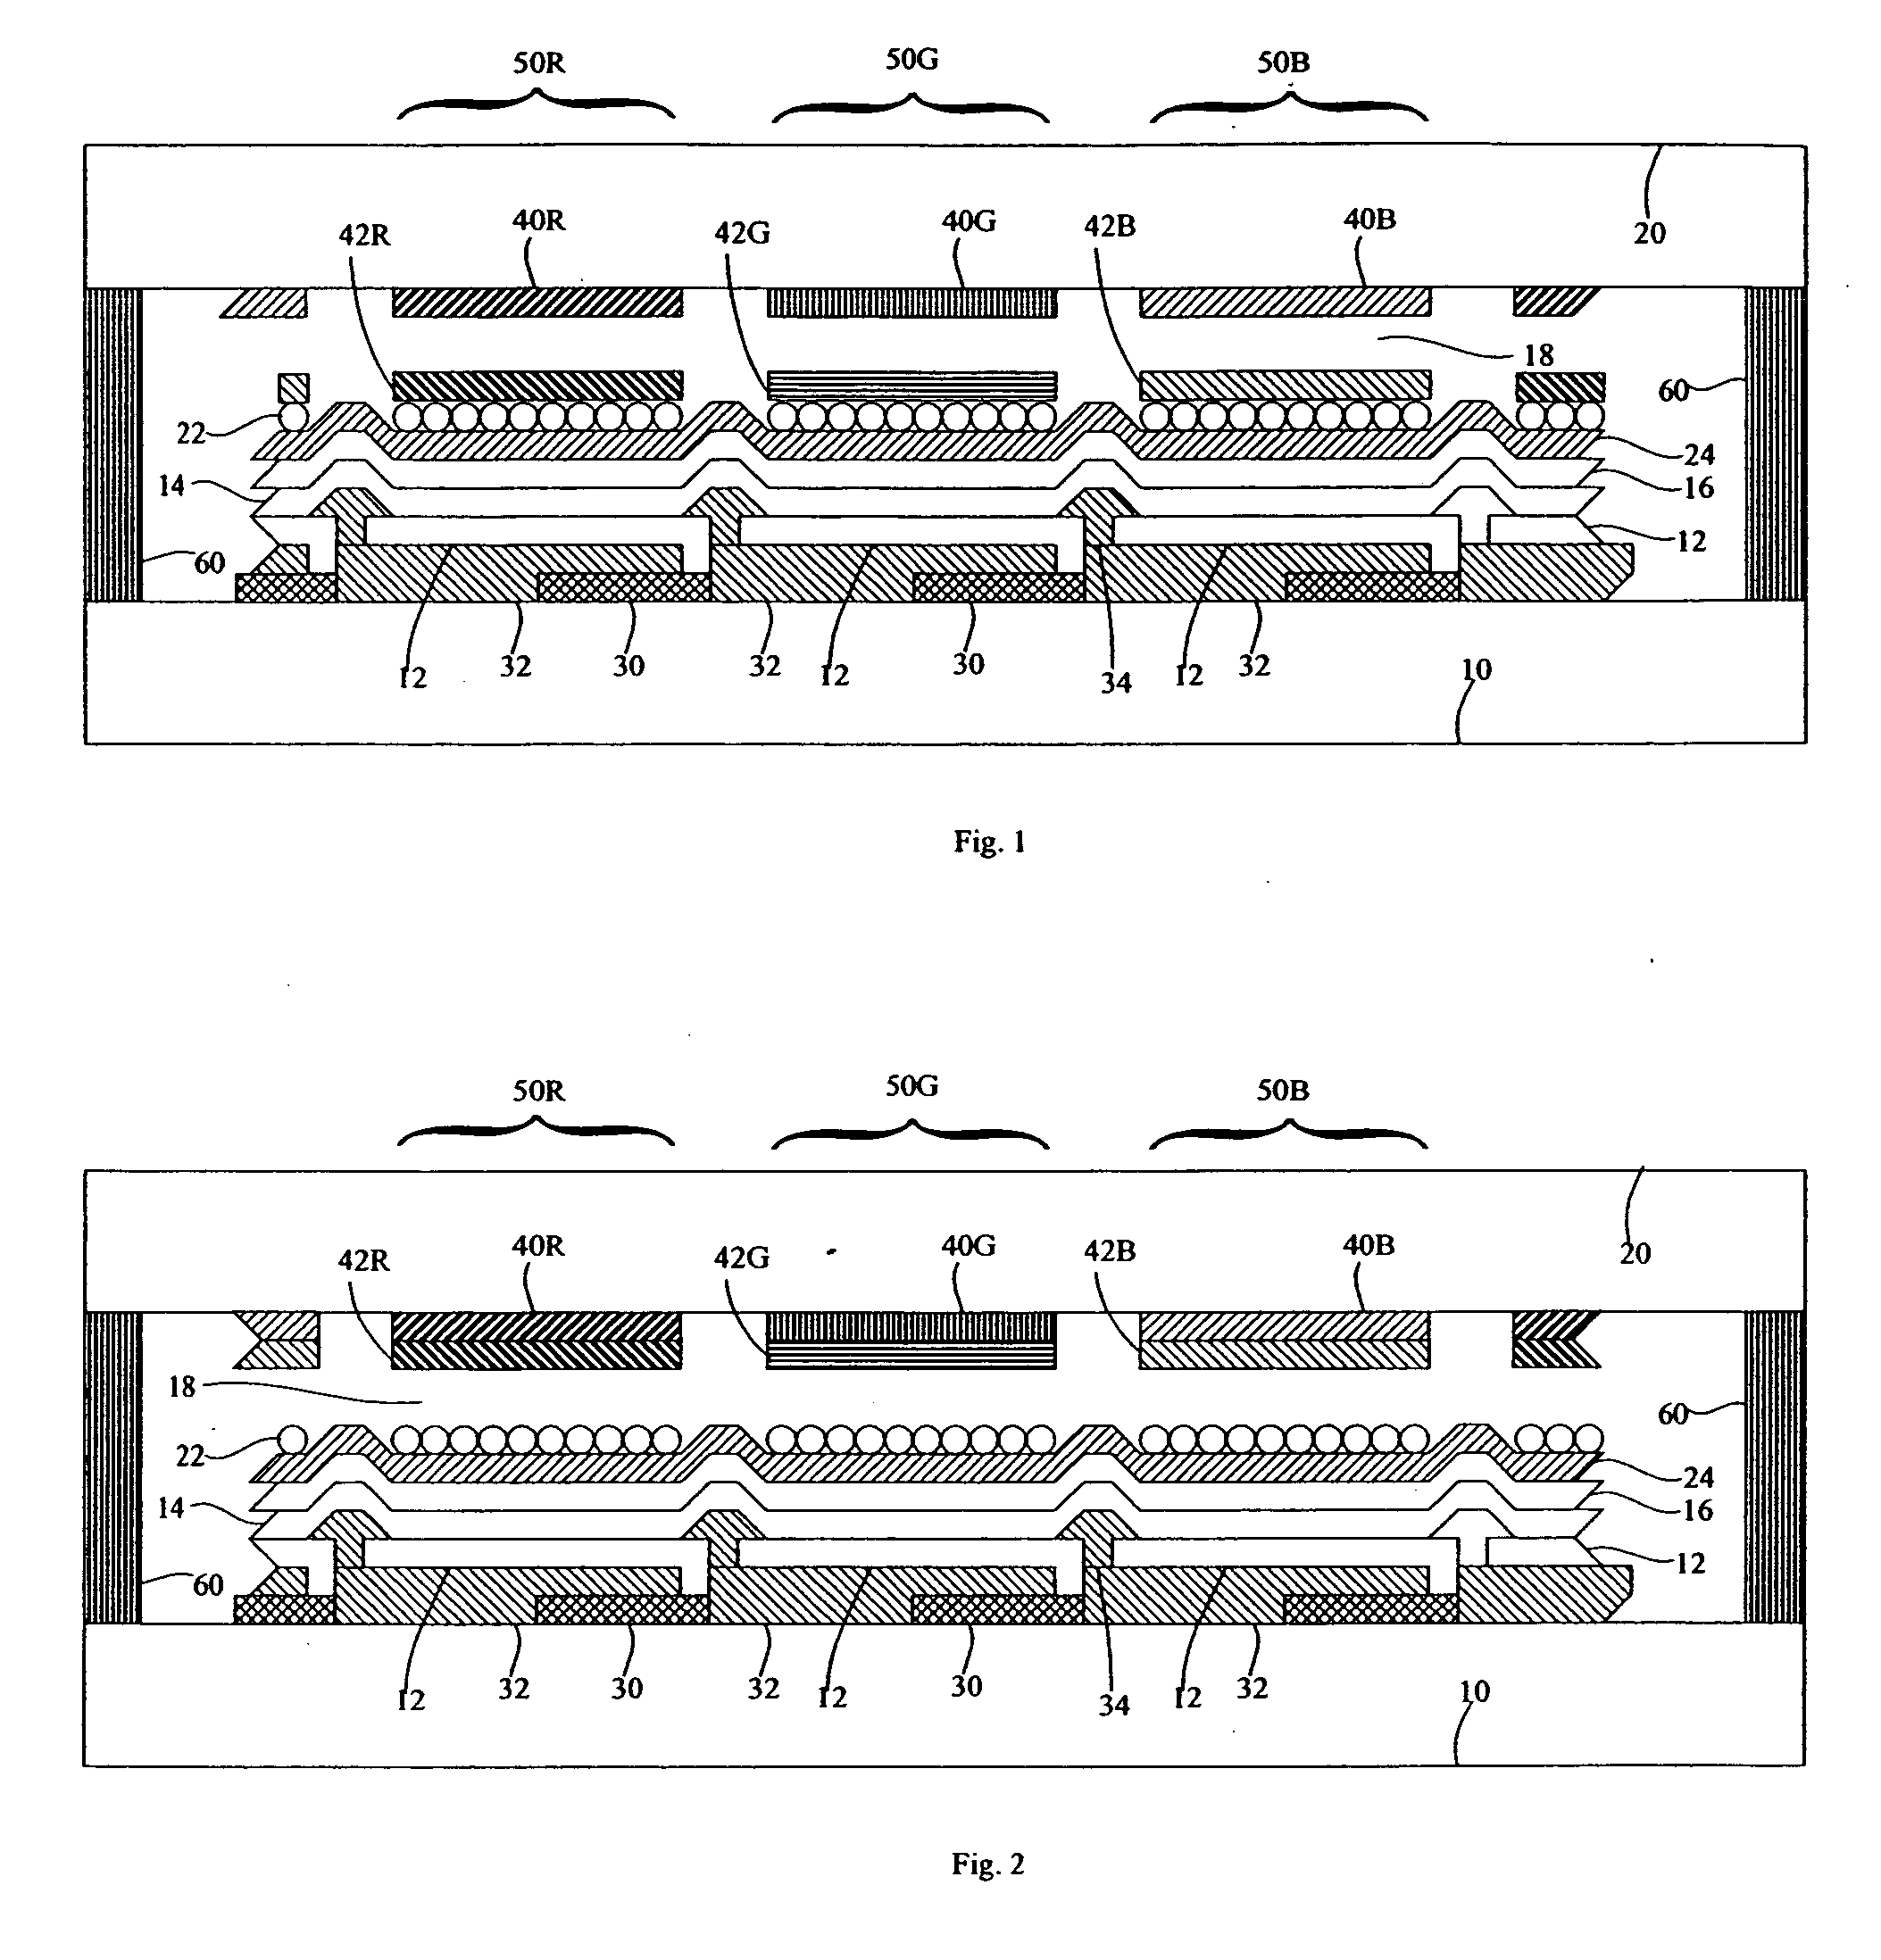 Top-emitter OLED device structure and method